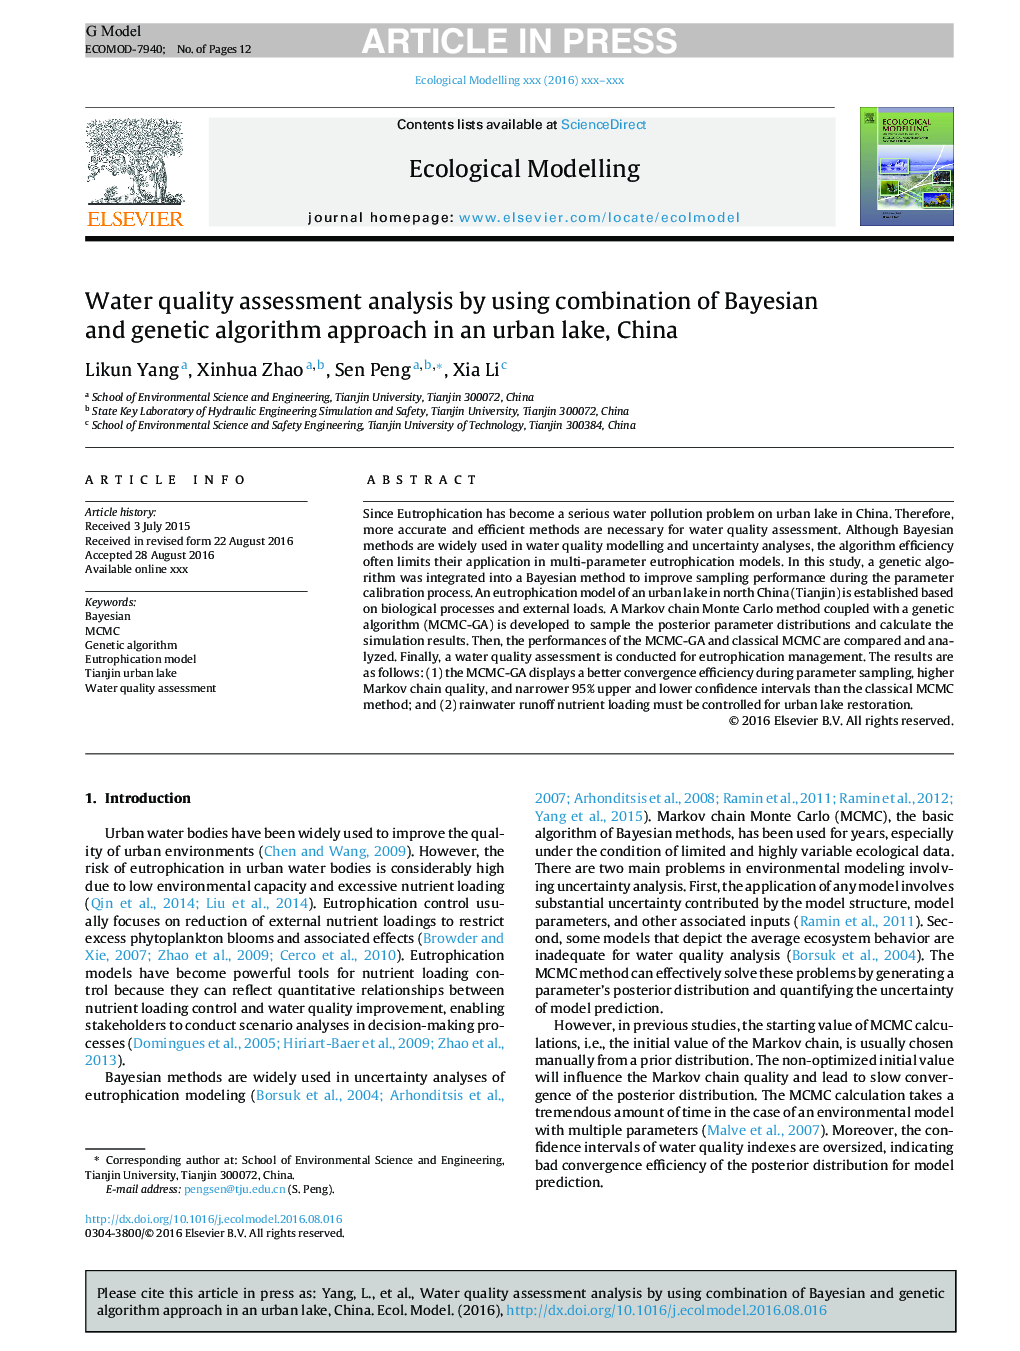 Water quality assessment analysis by using combination of Bayesian and genetic algorithm approach in an urban lake, China